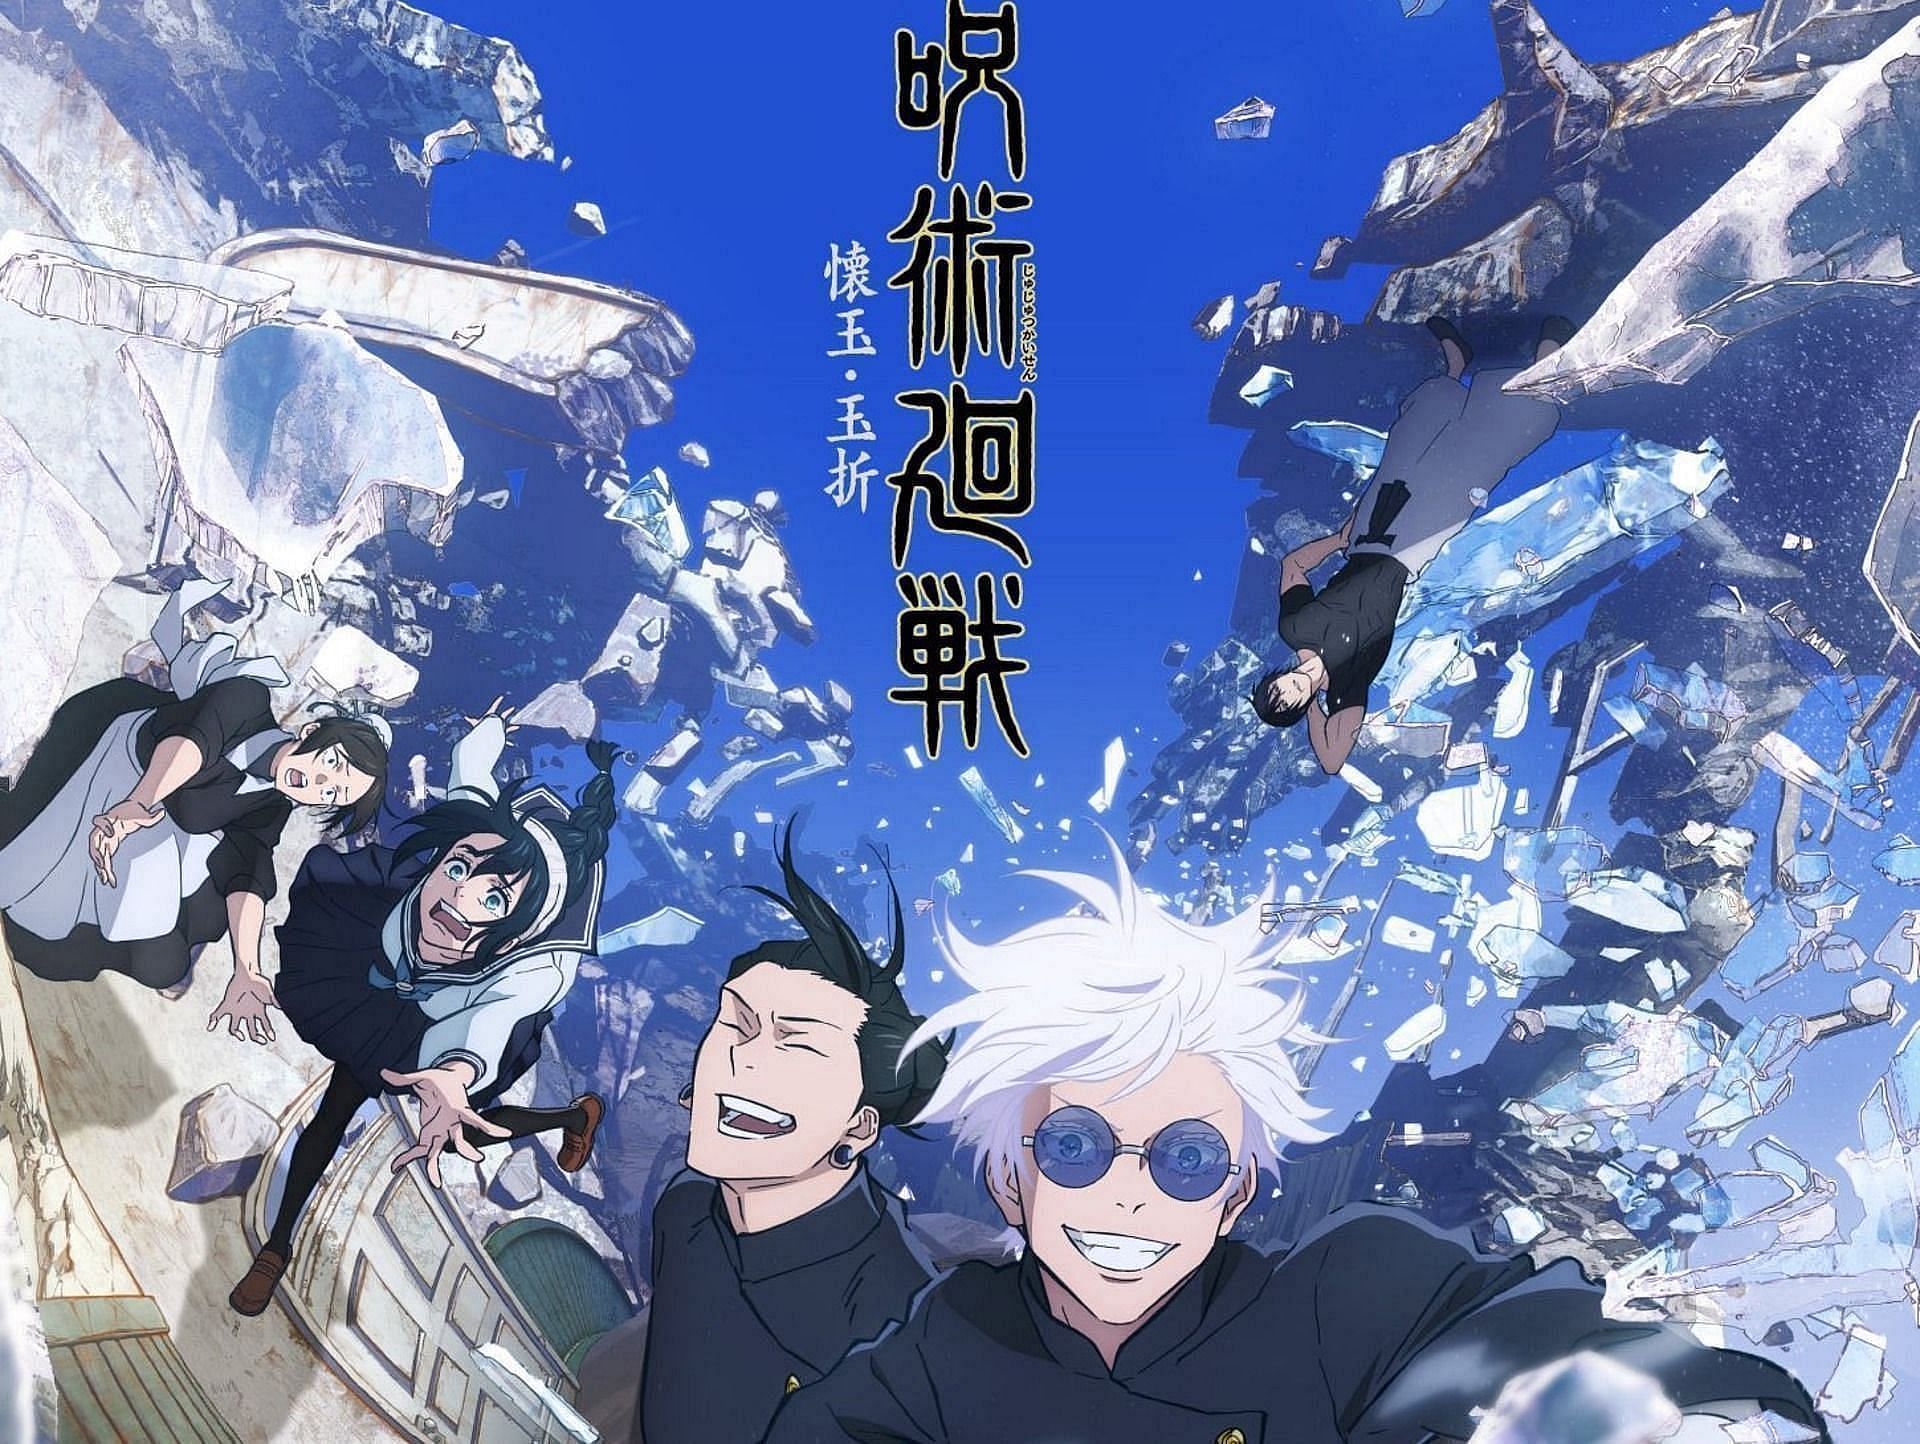 The Jujutsu Kaisen season 2 official trailer crosses 10 million views, and fans are delighted (Image via MAPPA)